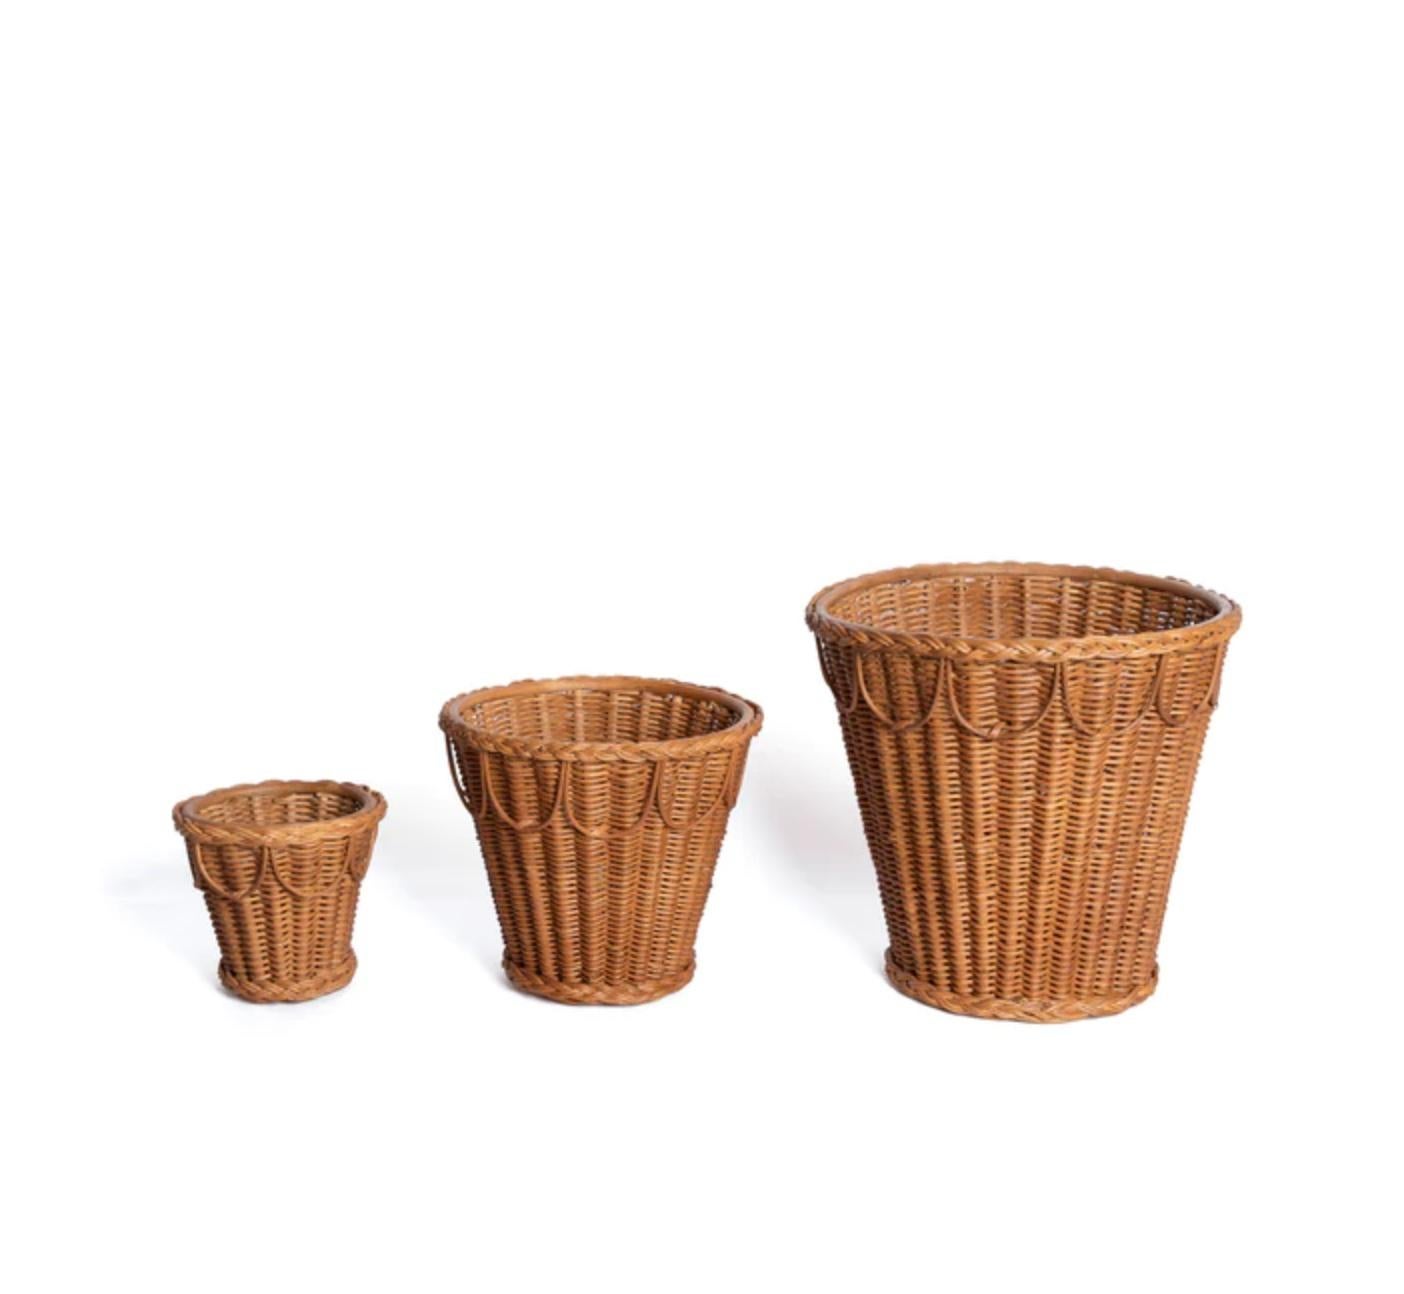 Indonesian Cache Pinet Pot in Natural Honey Rattan, Modern, Rustic Accessory by Louise Roe